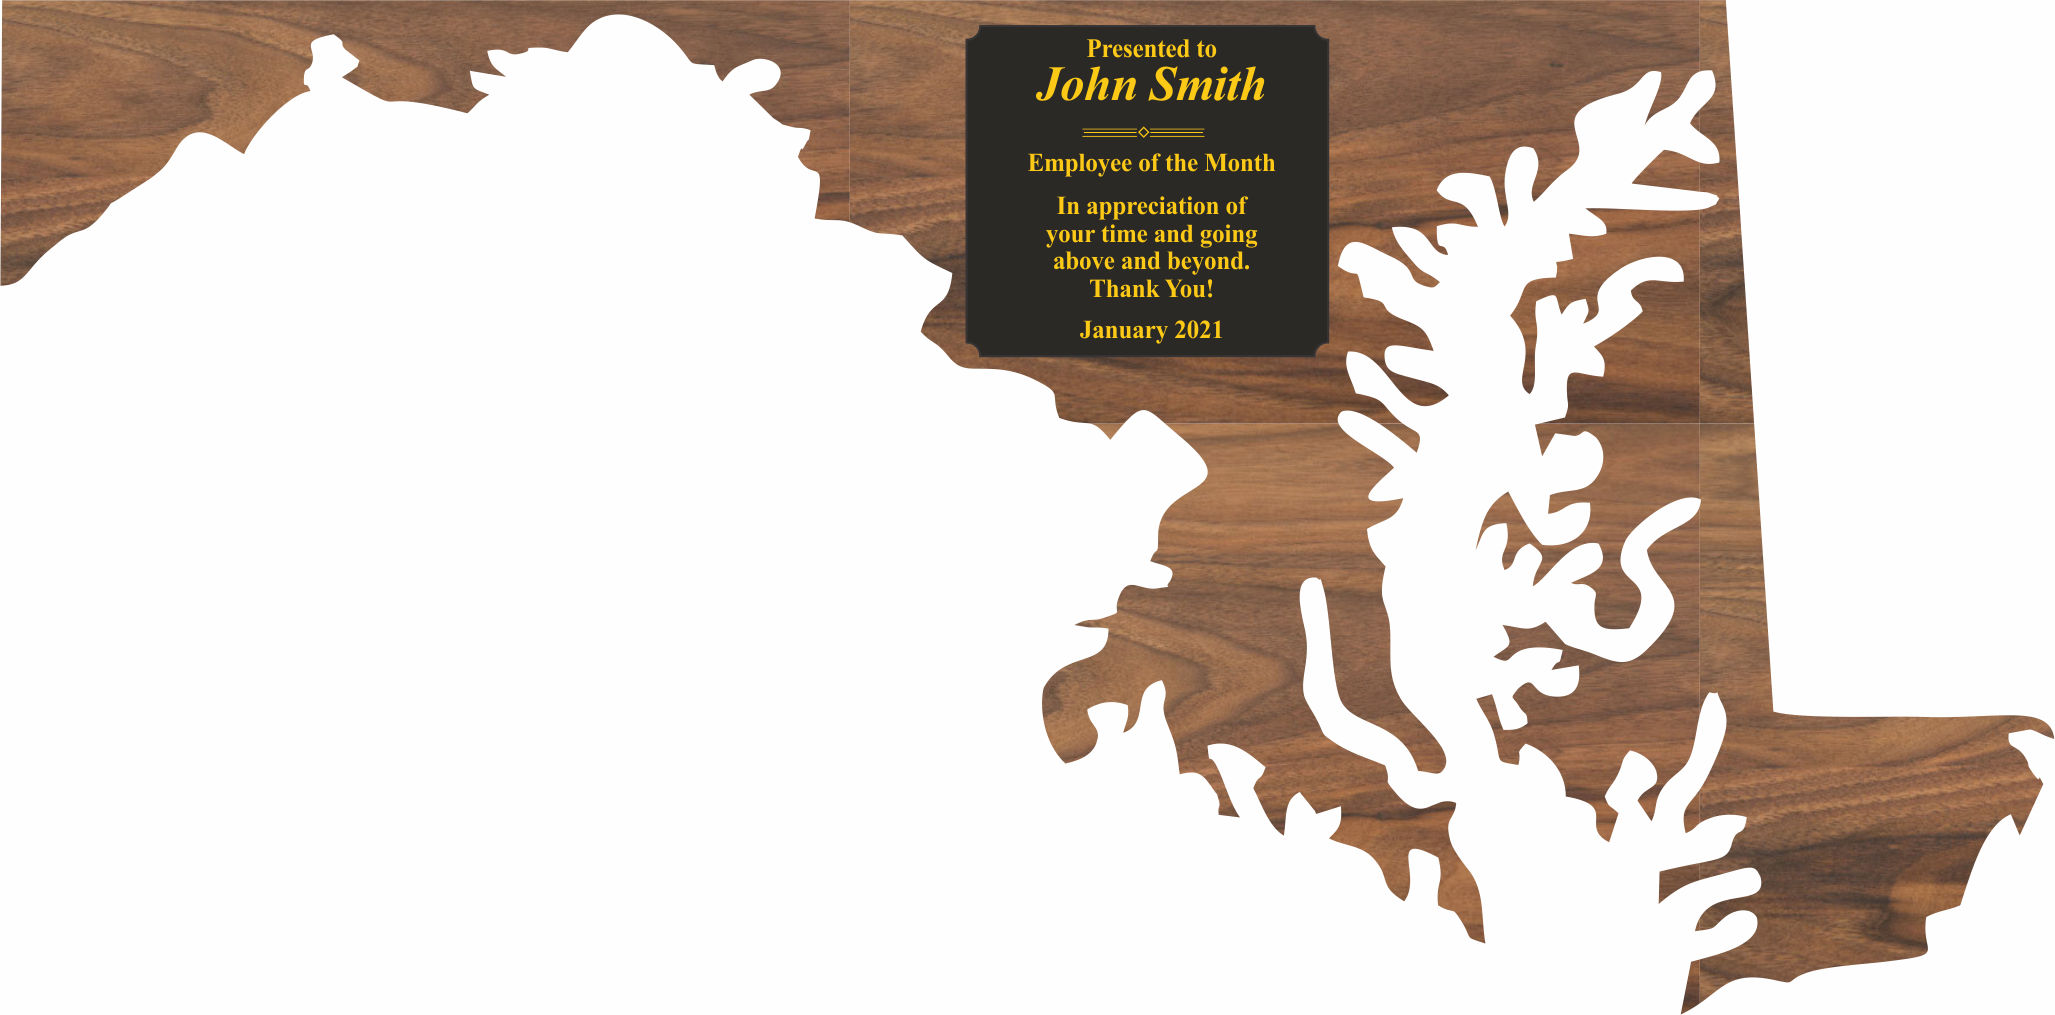 Custom Printed Maryland State Shaped Plaques